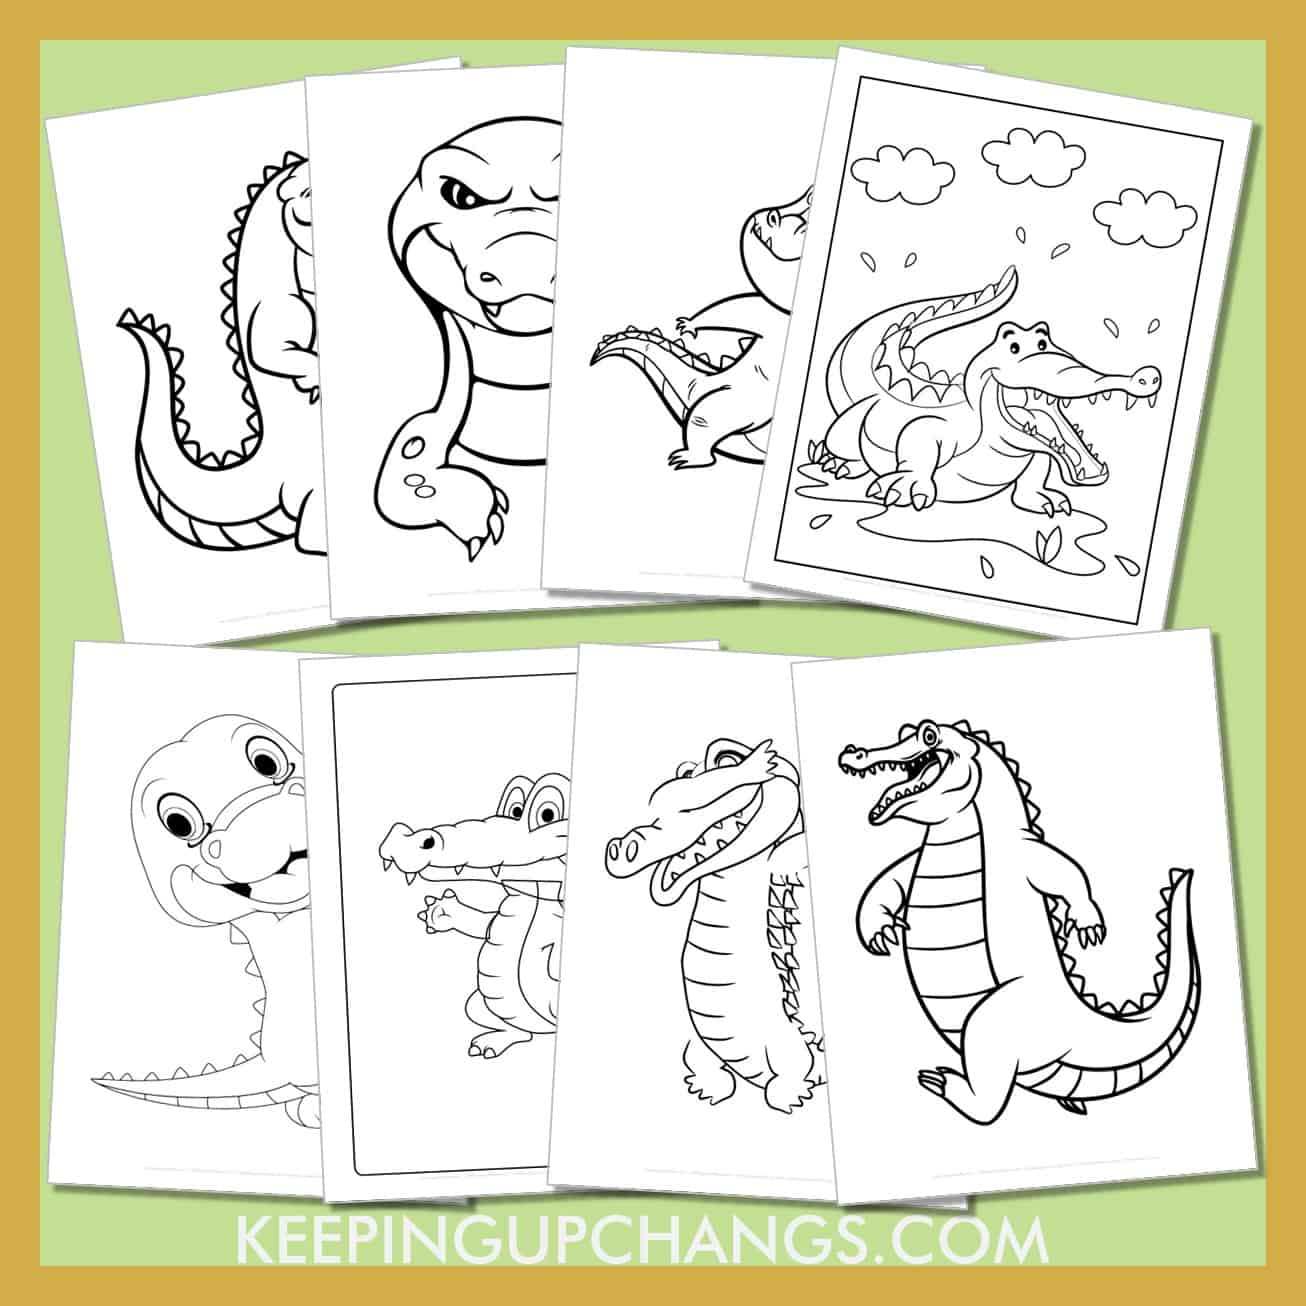 free alligator, crocodile pictures to color for toddlers, kids, adults.